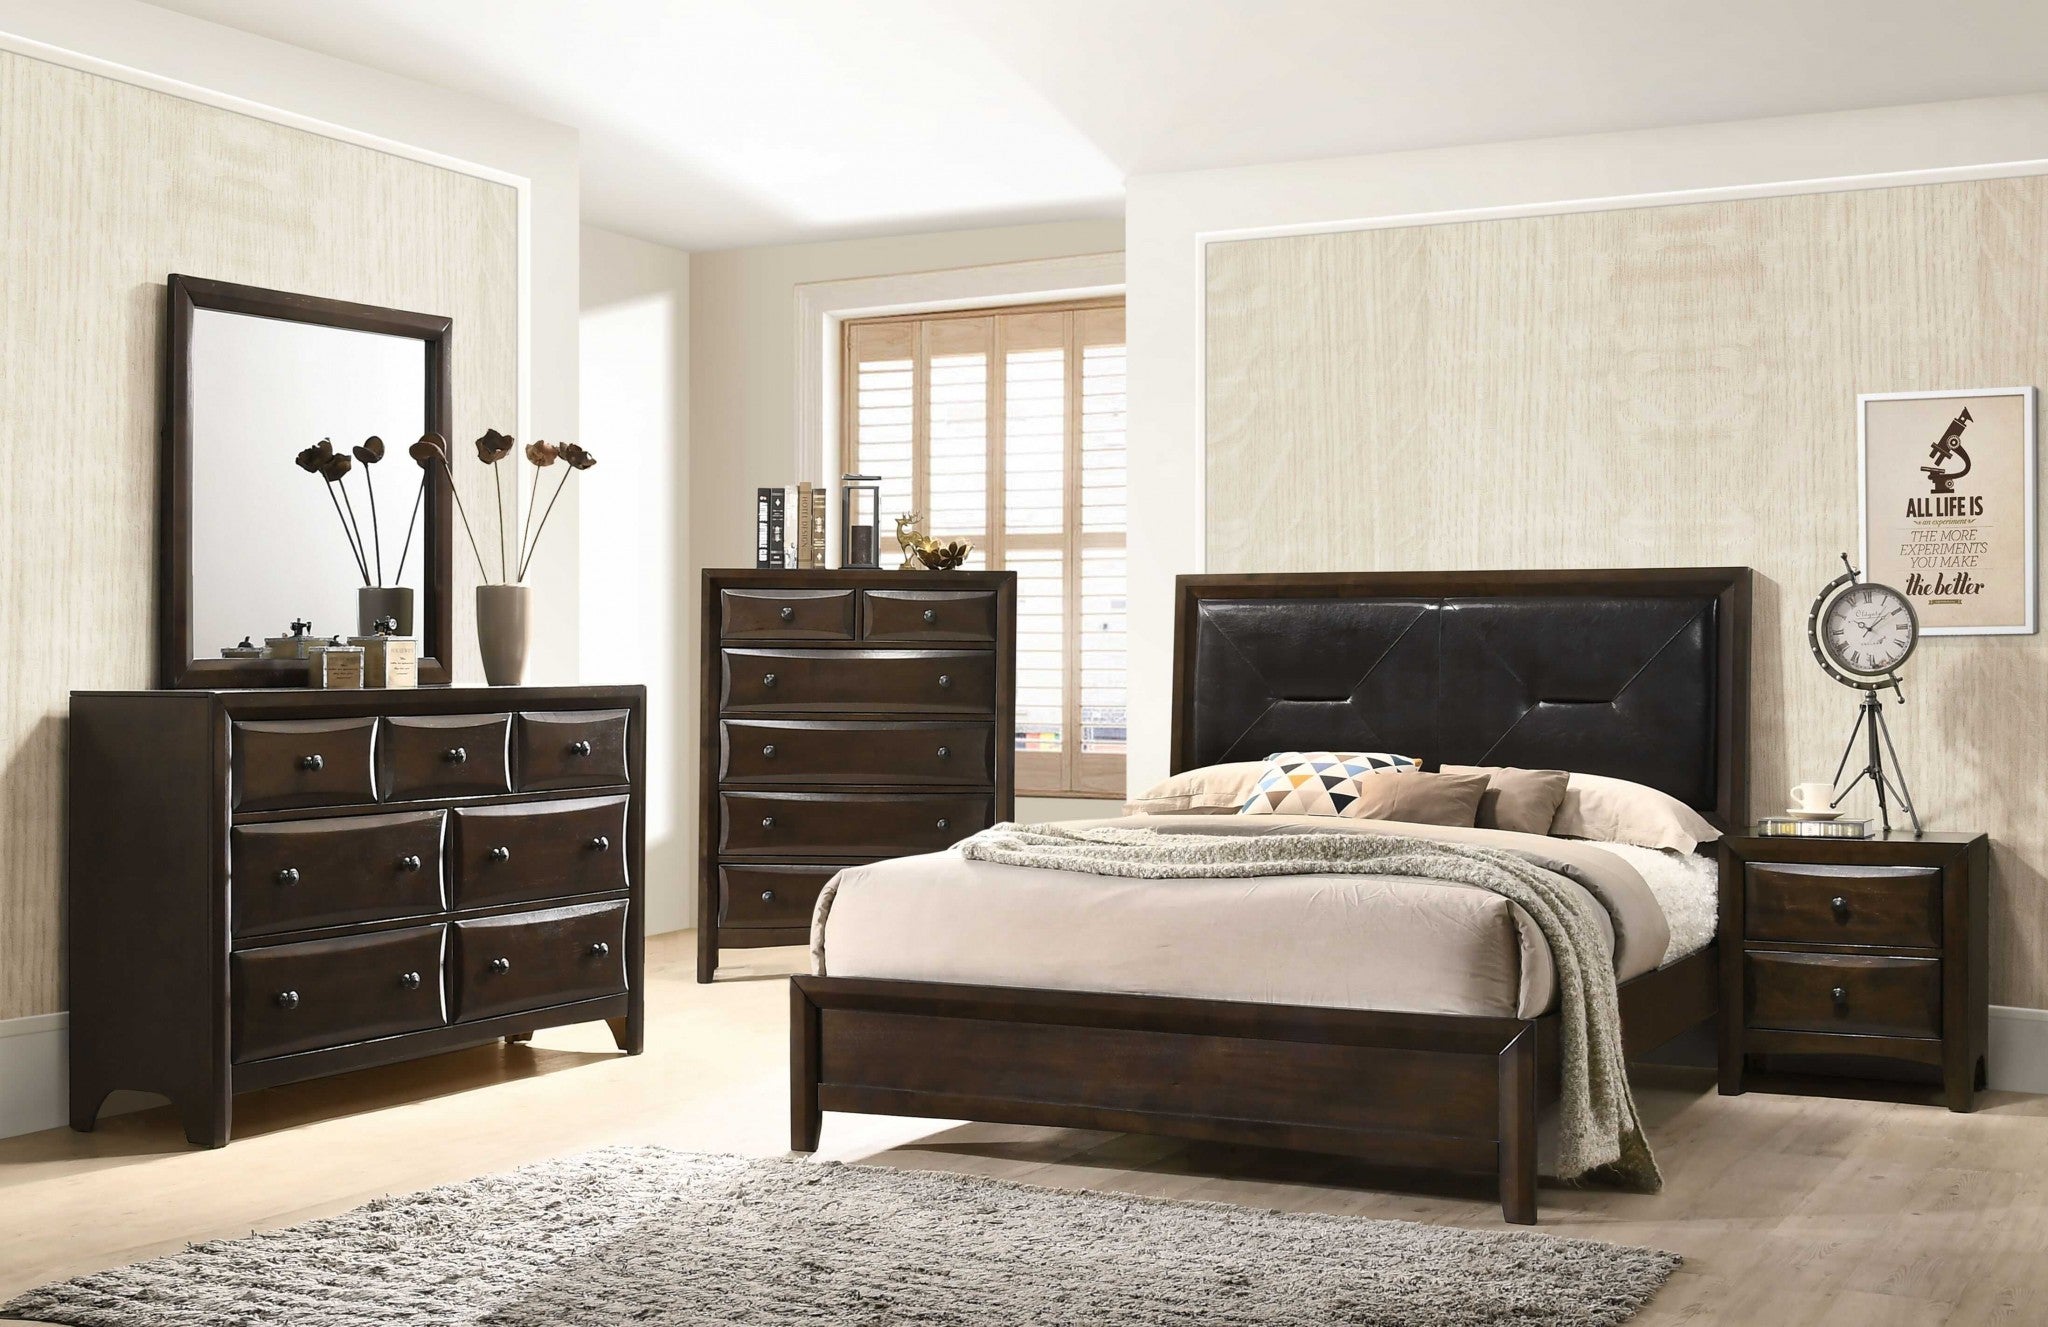 64" X 83" X 52" Black PU Walnut Wood Upholstered HB Queen Bed Default Title